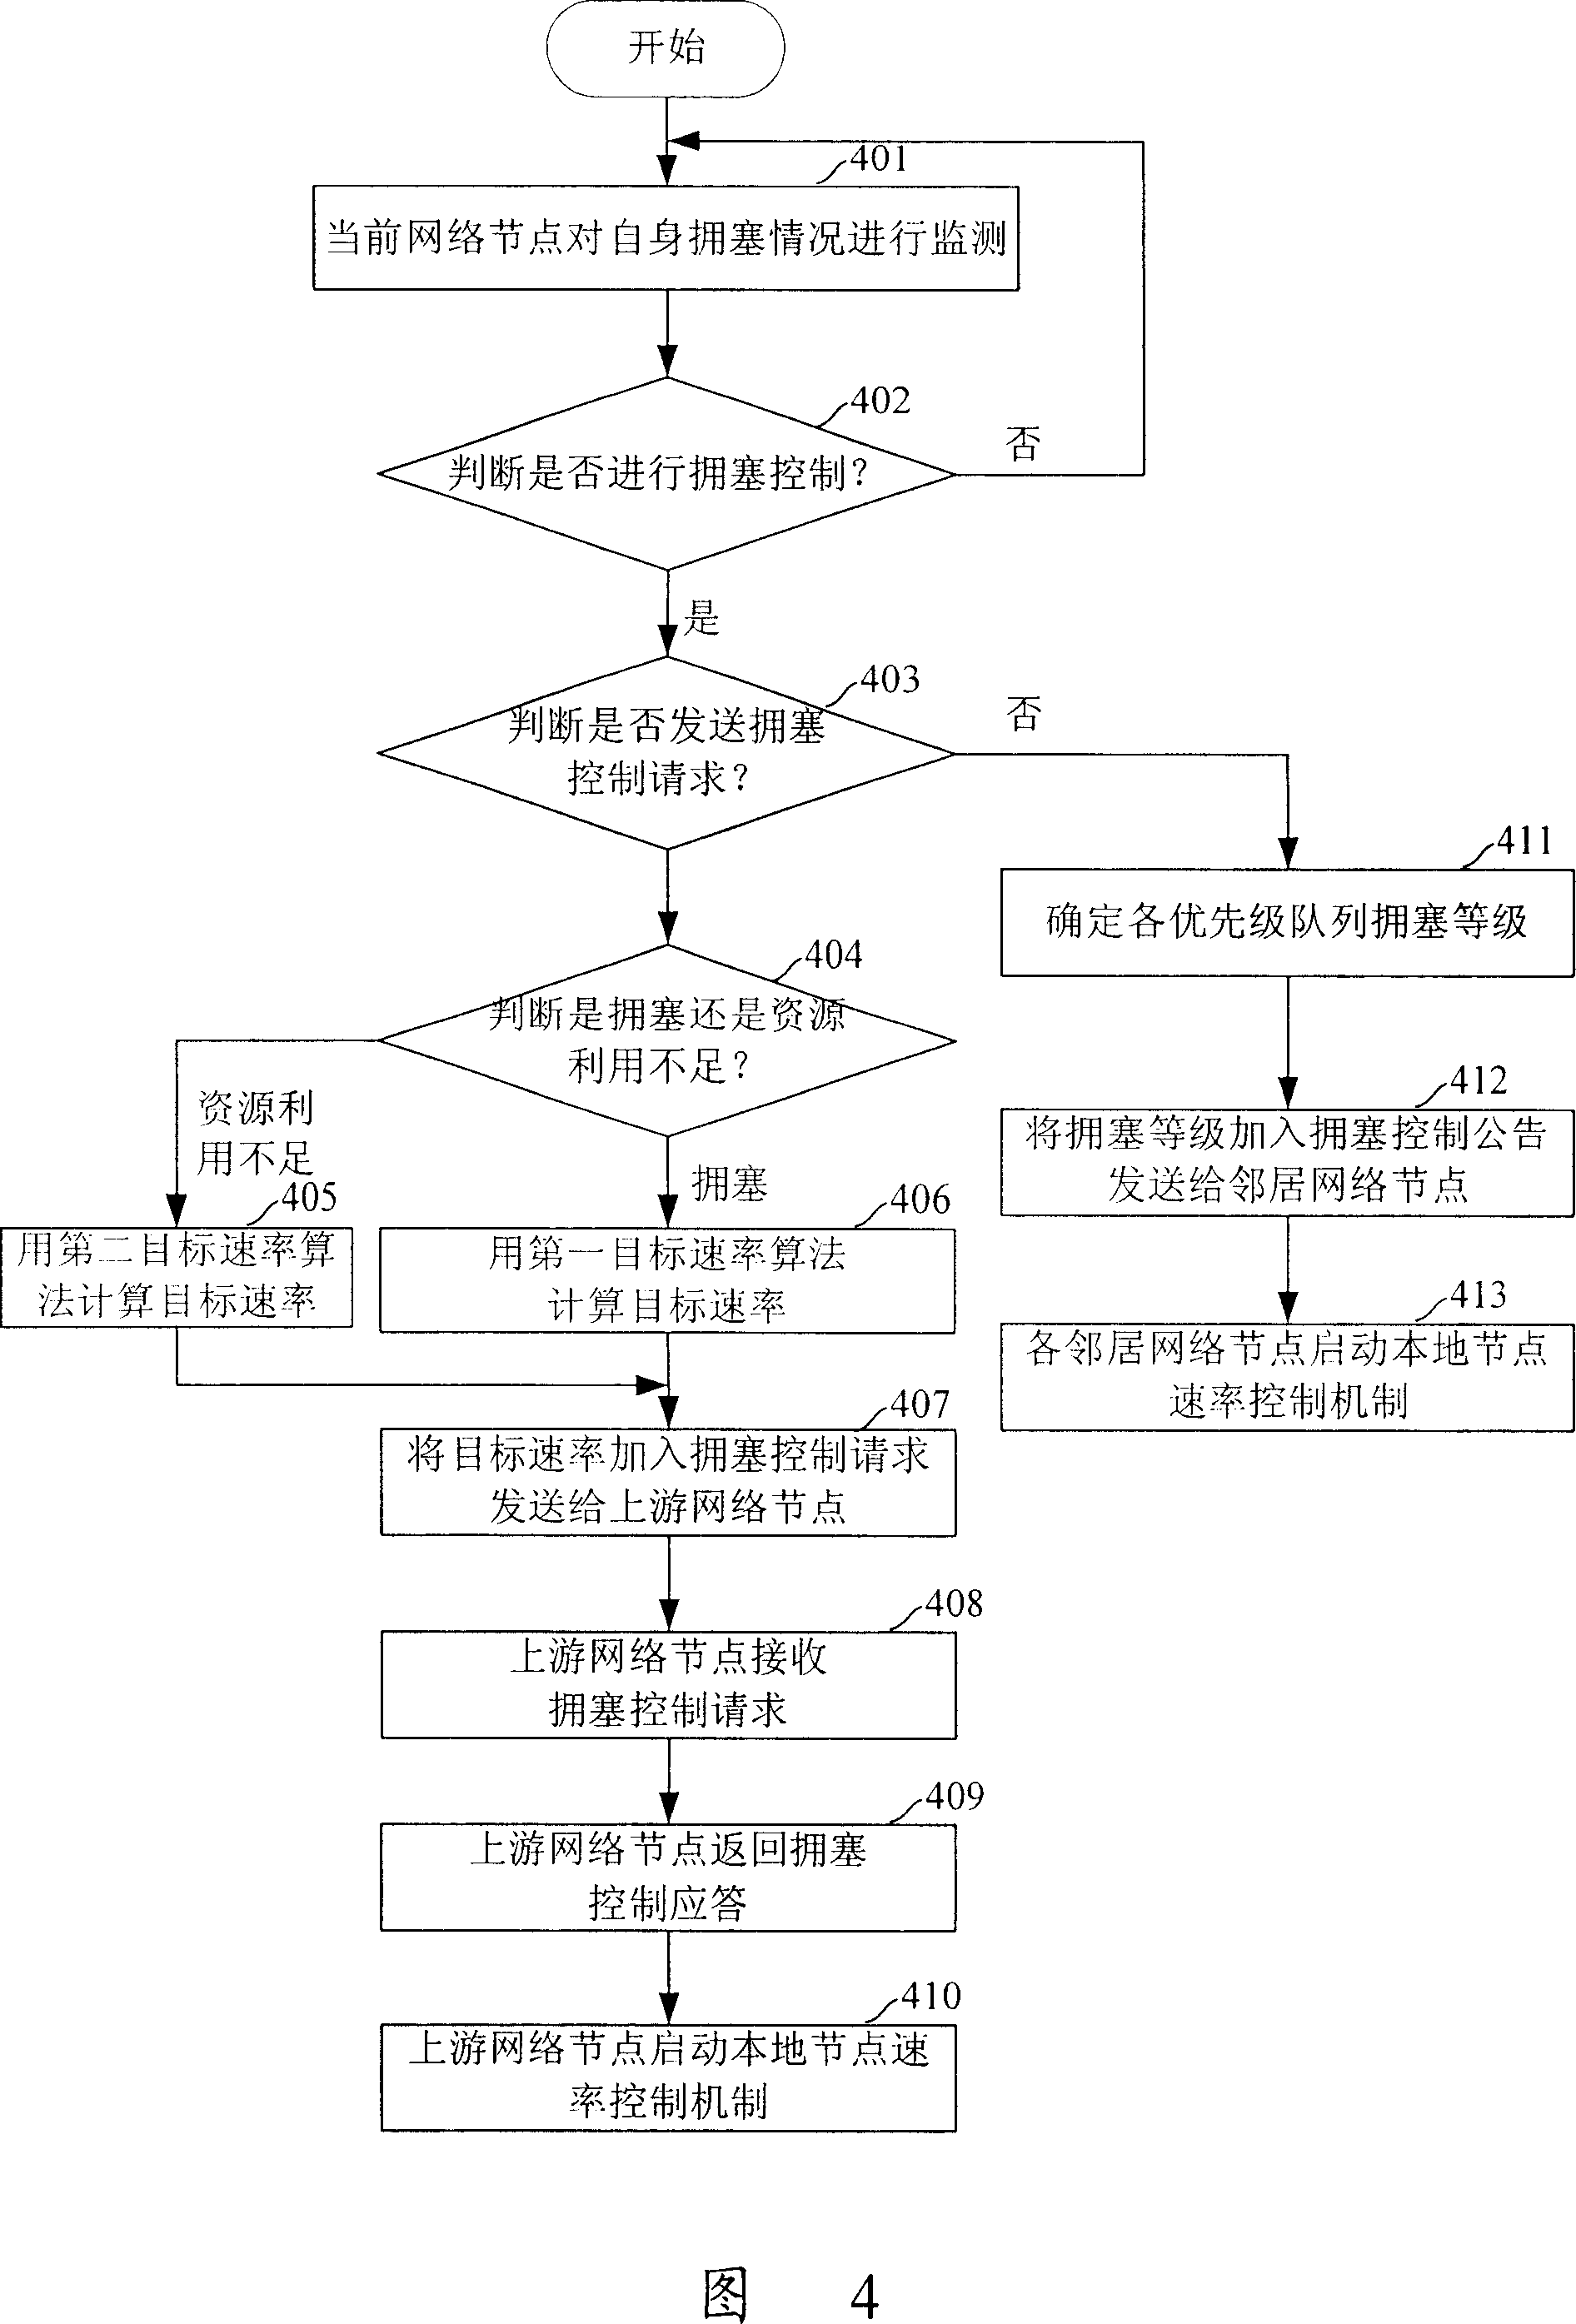 Two-layer congestion control method of wireless network